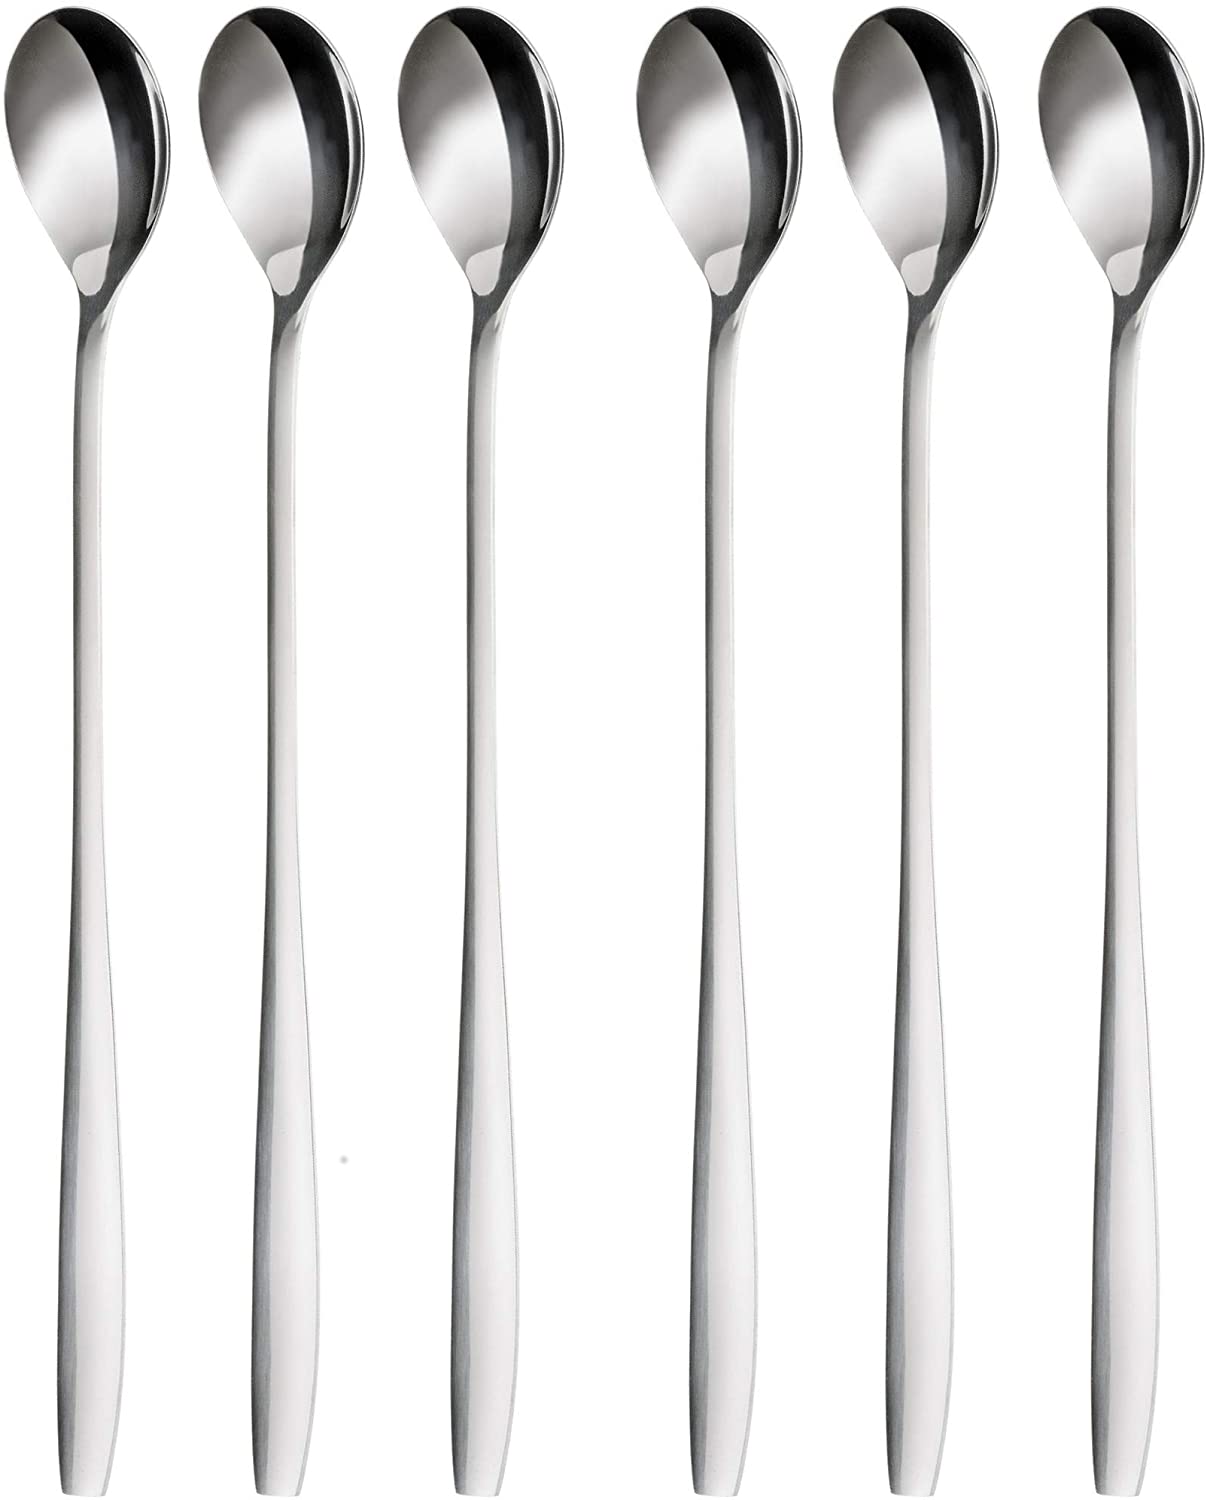 GRAWE Gräwe Latte Macchiato Spoons, Set of 6, 22 cm, Long Spoons for Cocktails and Desserts, Polished Stainless Steel, Dishwasher-Safe